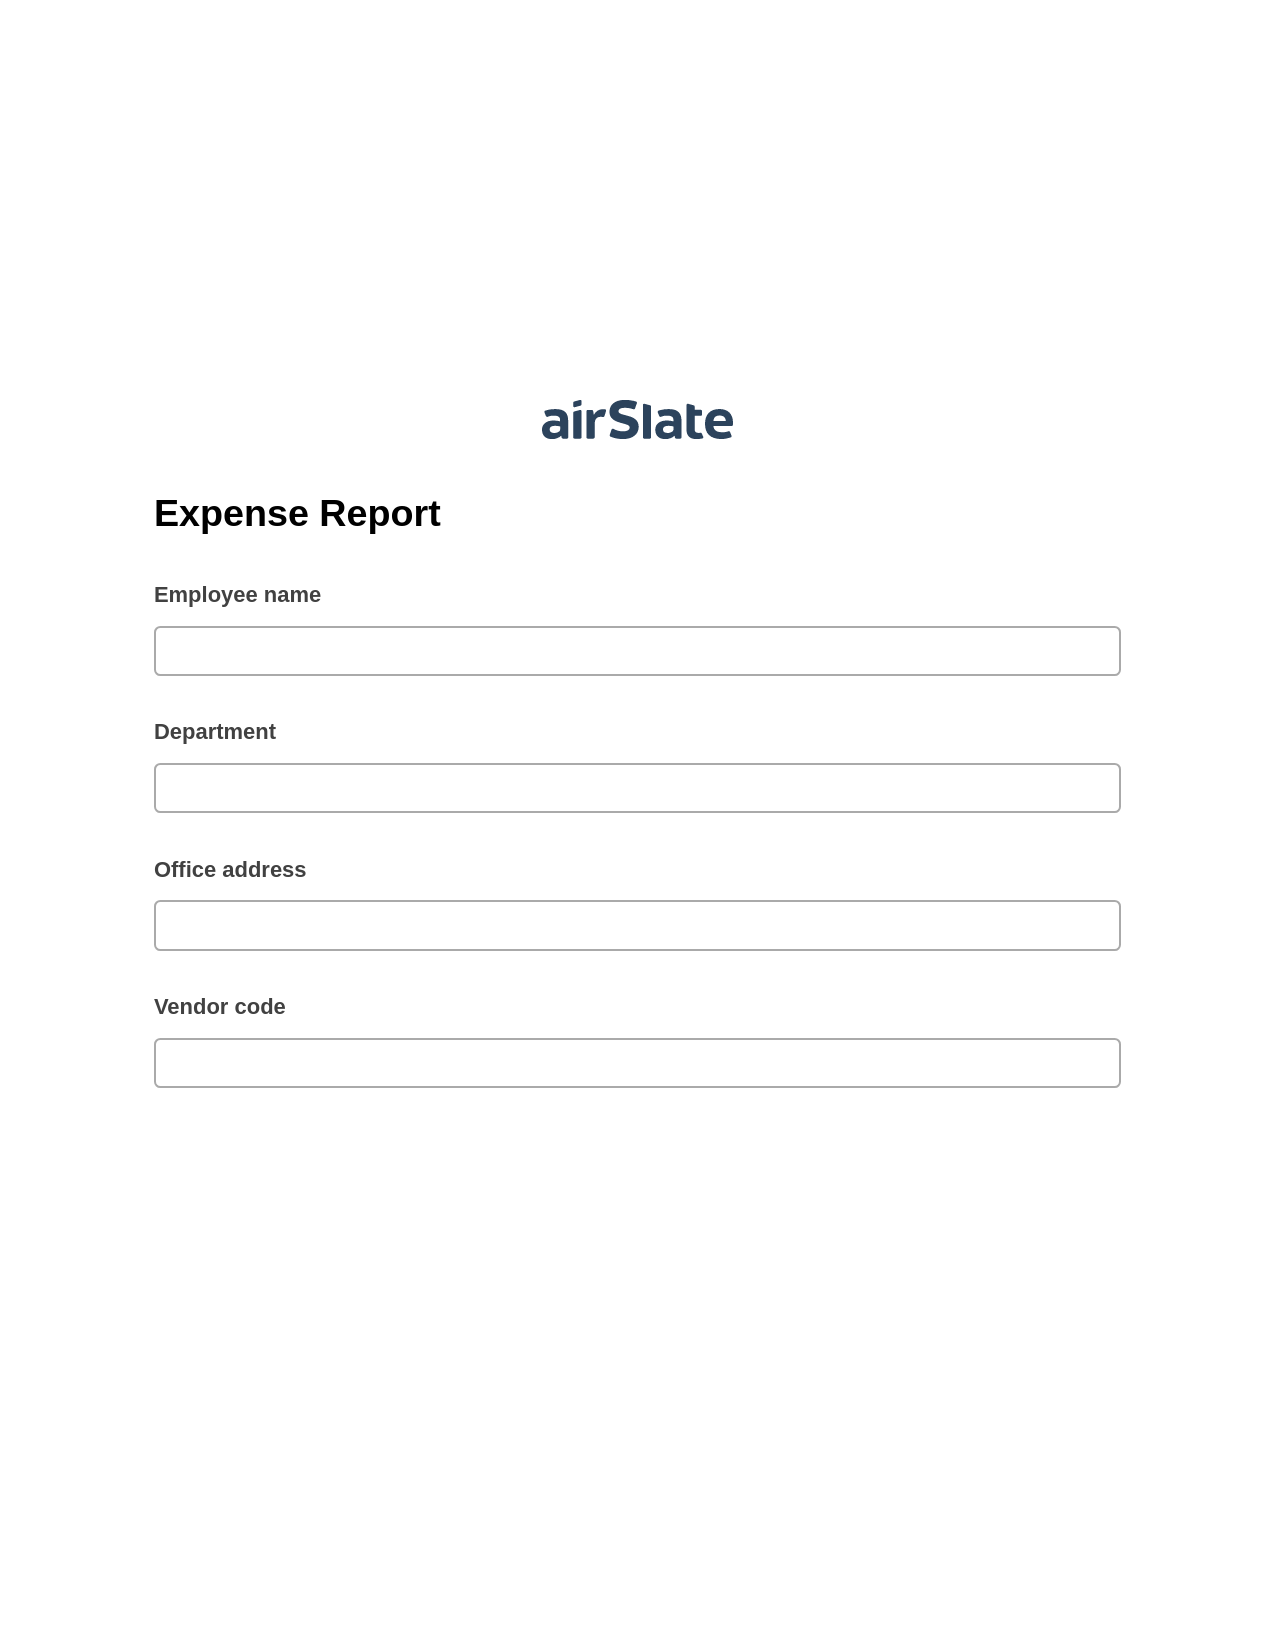 Expense Report Pre-fill Dropdowns from Excel Bot, Update MS Dynamics 365 Records Bot, Archive to SharePoint Folder Bot